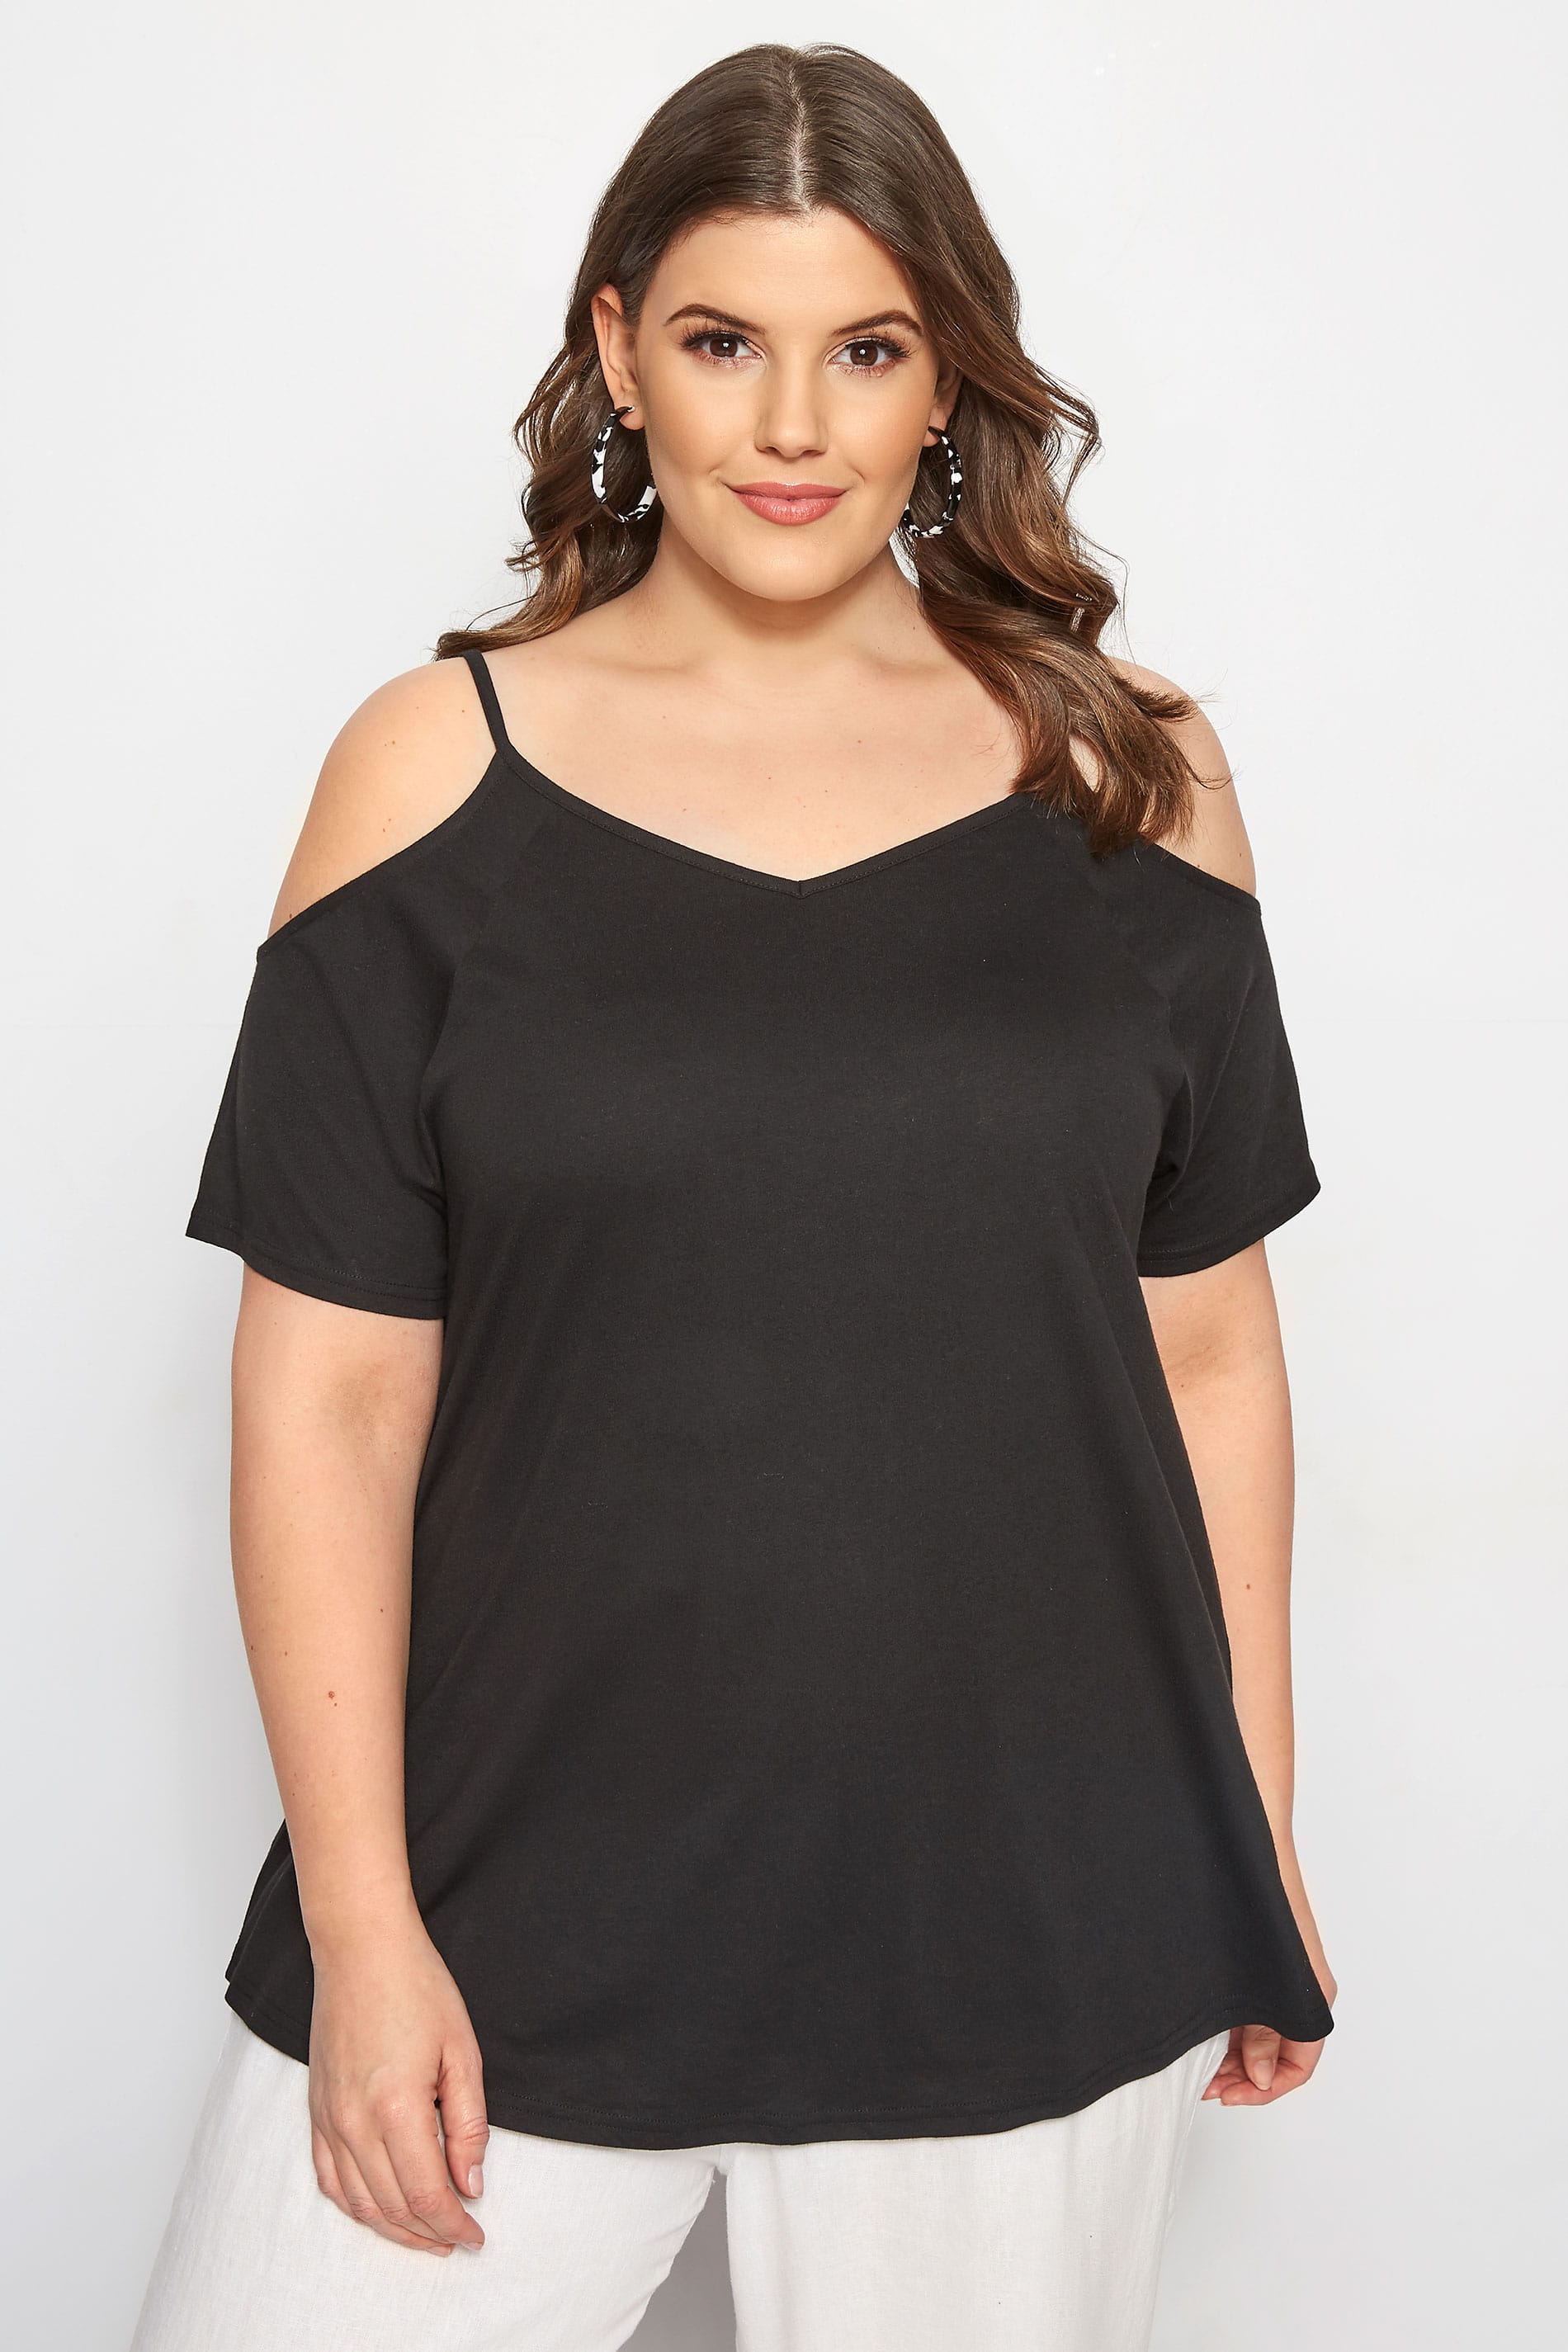 Black Cold Shoulder Top | Plus Sizes 16 to 36 | Yours Clothing